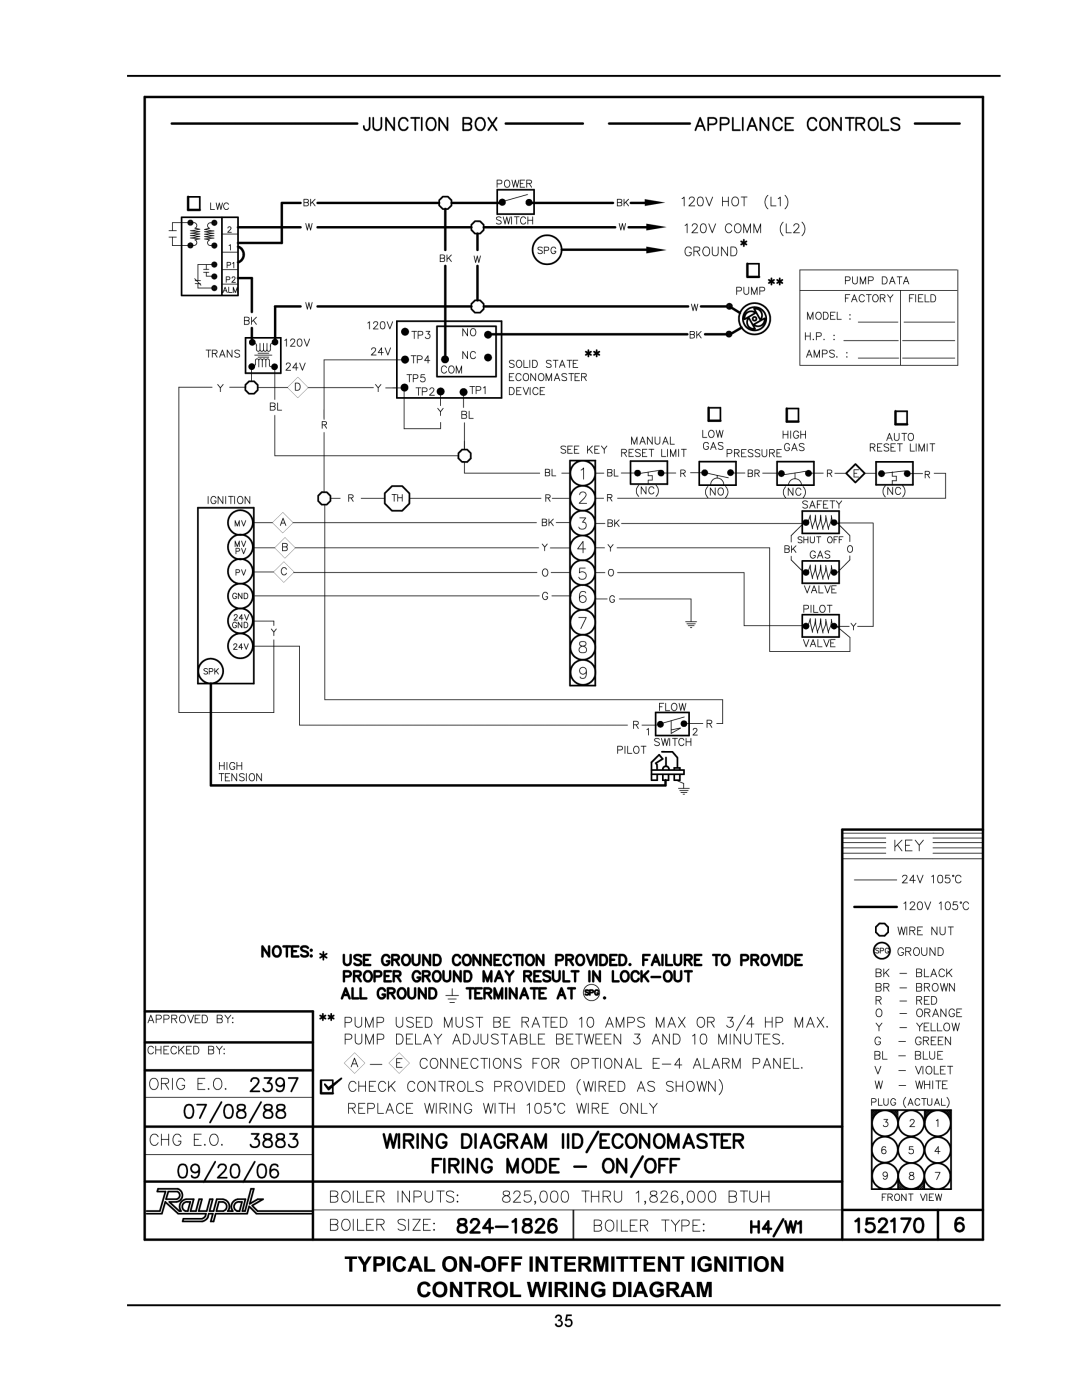 Raypak 133-4001 manual Typical On-Offintermittent Ignition, Control Wiring Diagram 